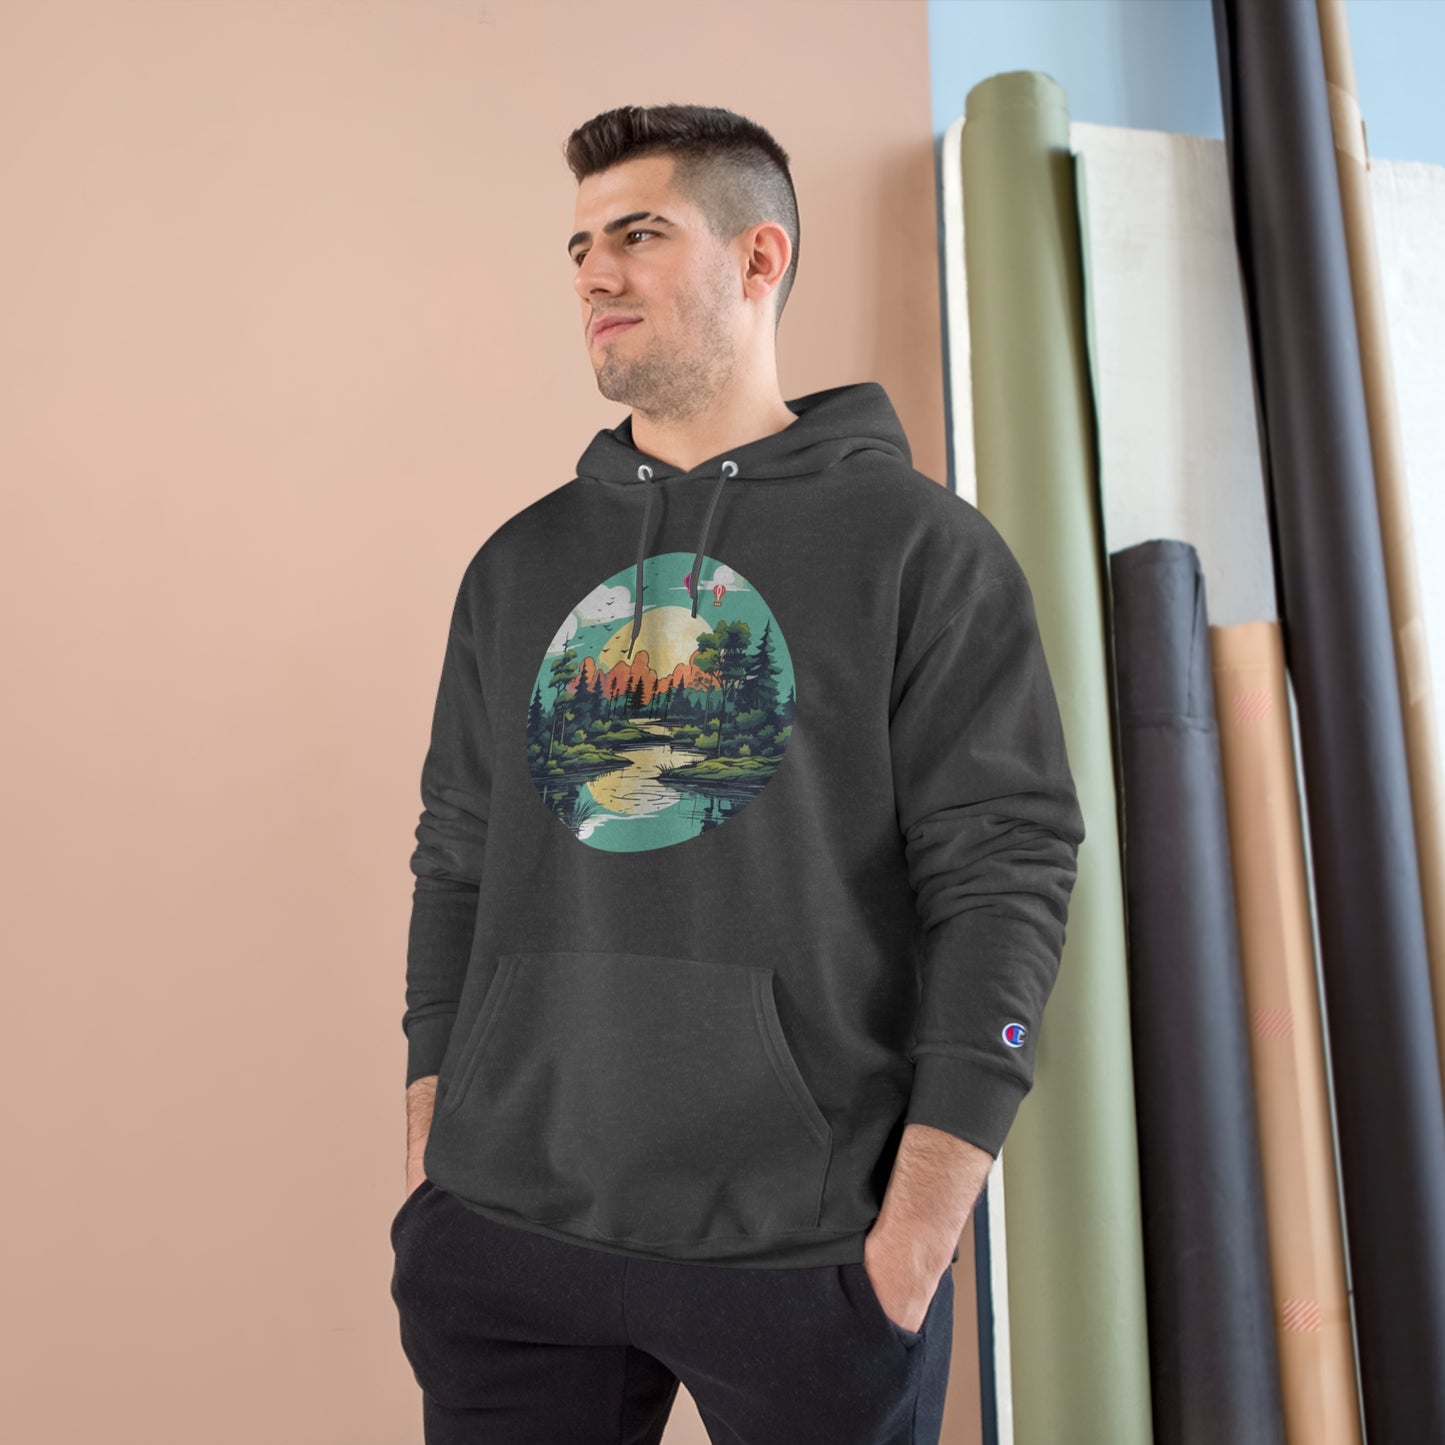 Nature is calling on this great outdoors design made for a very comfortable Champion Hoodie.